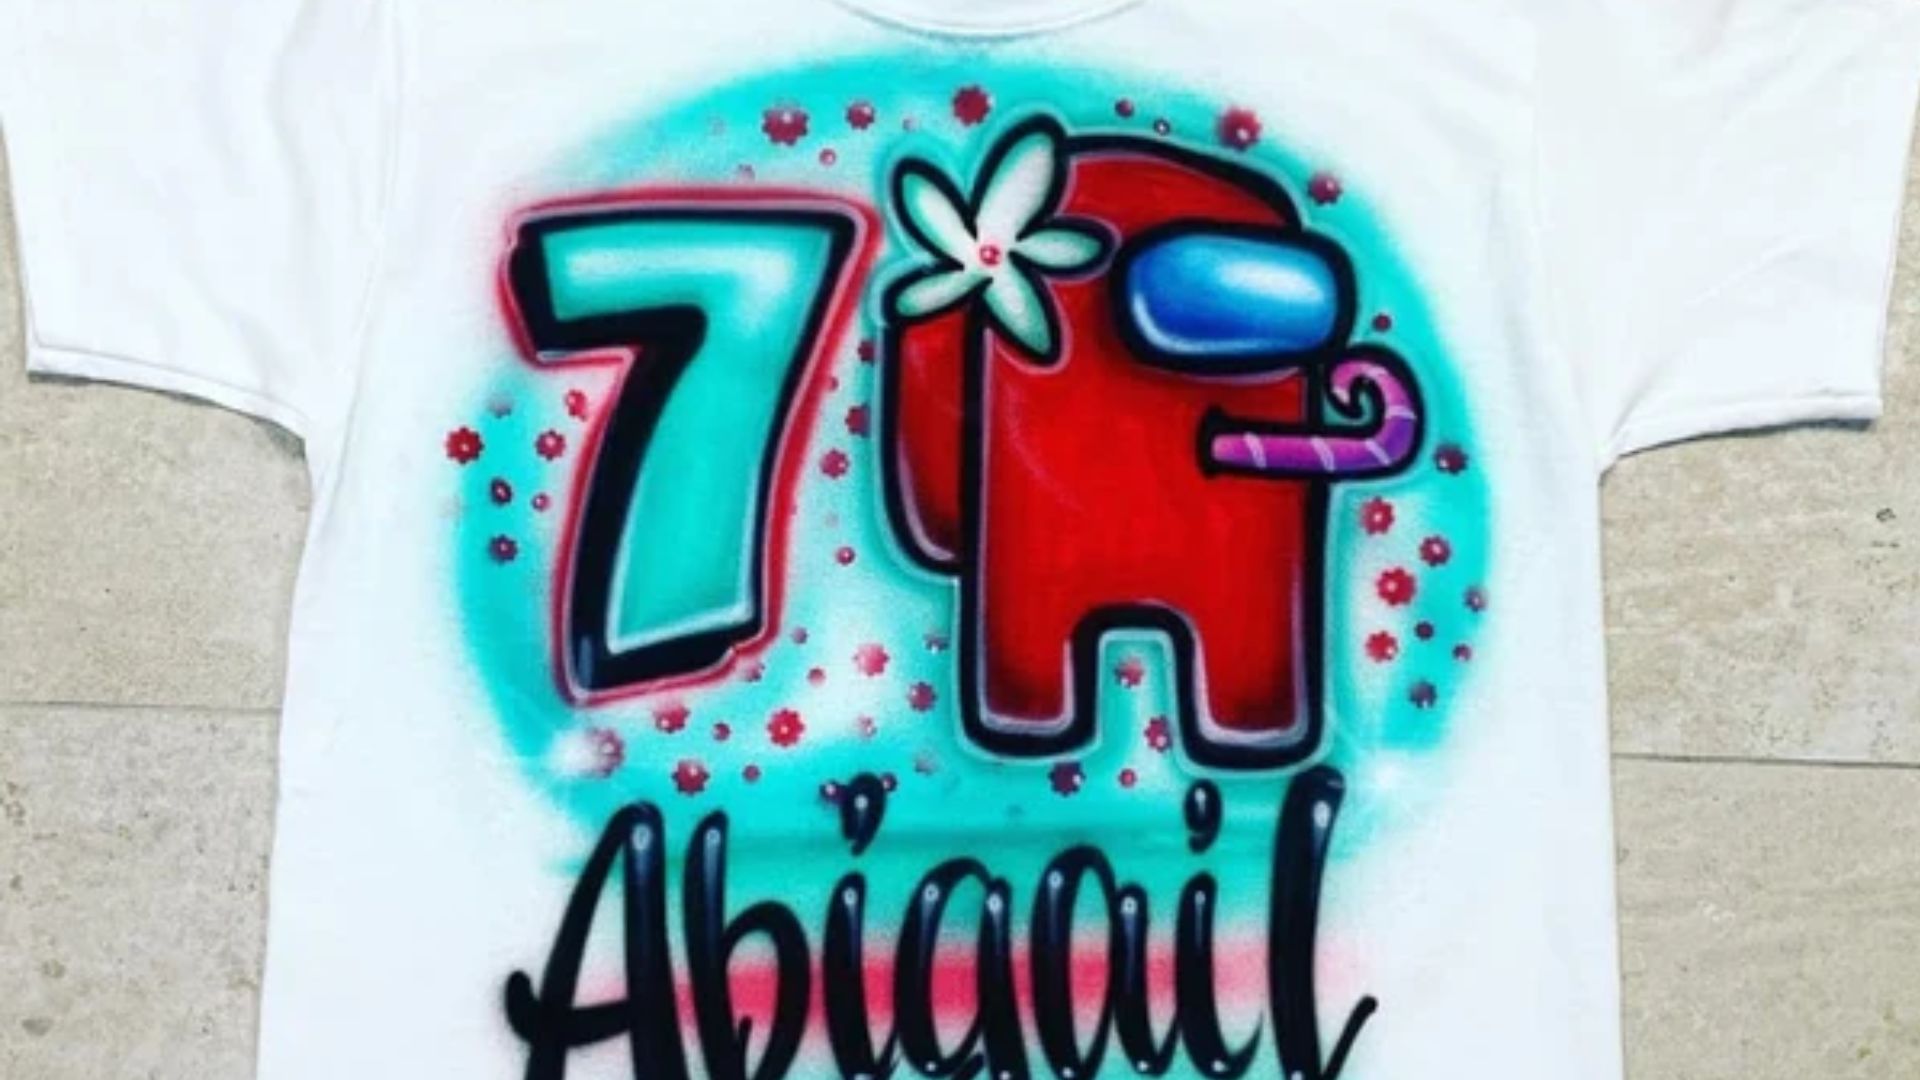 Elevate Your Style: The Artistry of Custom Airbrush Cartoon Shirts and Name Designs - WriteUpCafe.com